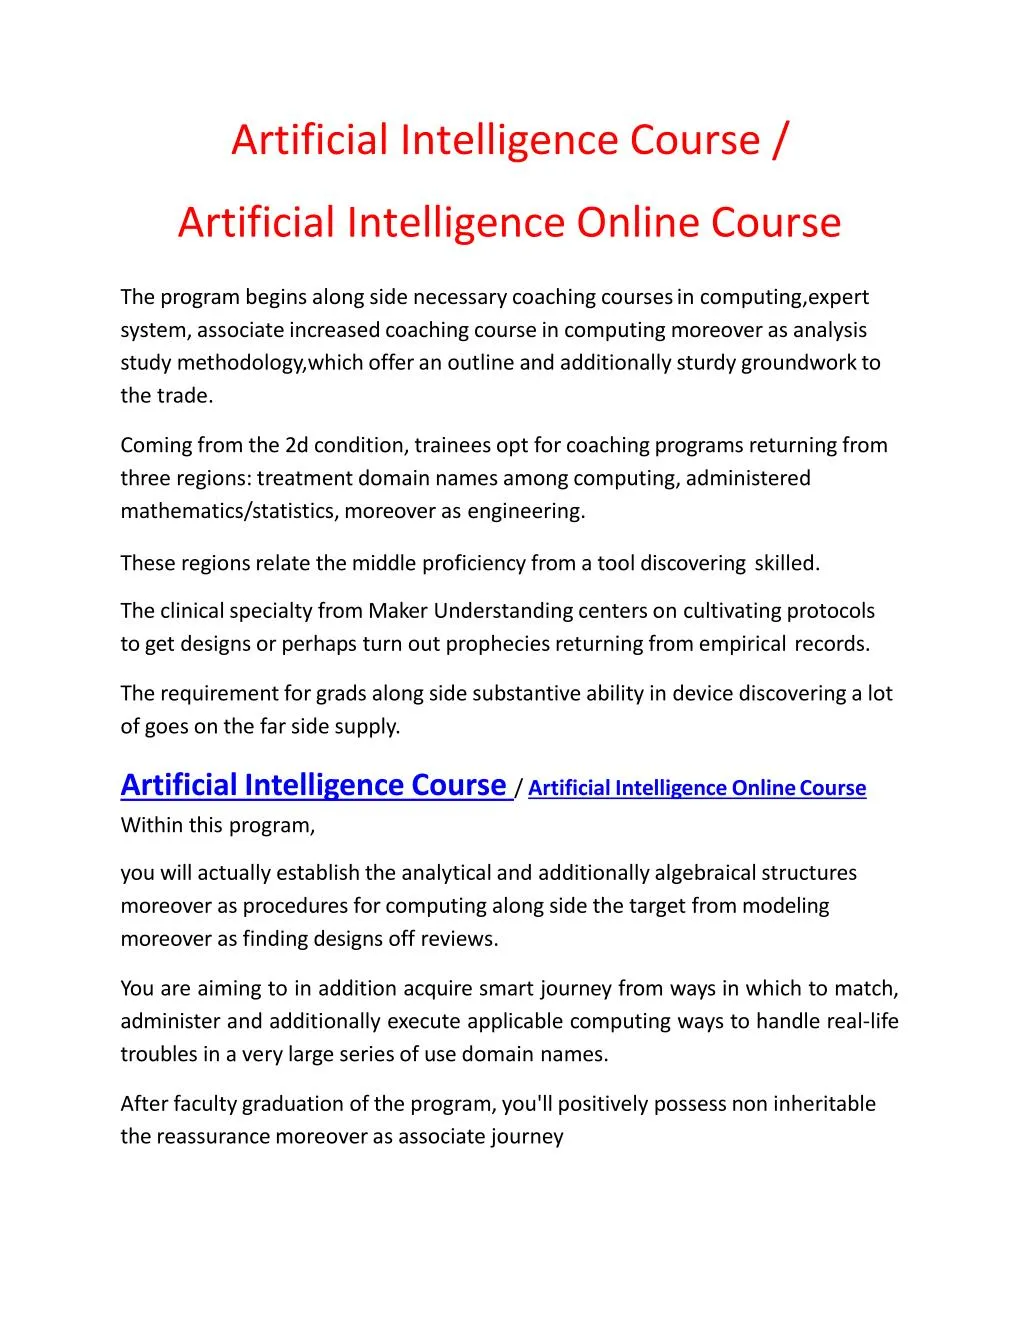 artificial intelligence course artificial intelligence online course